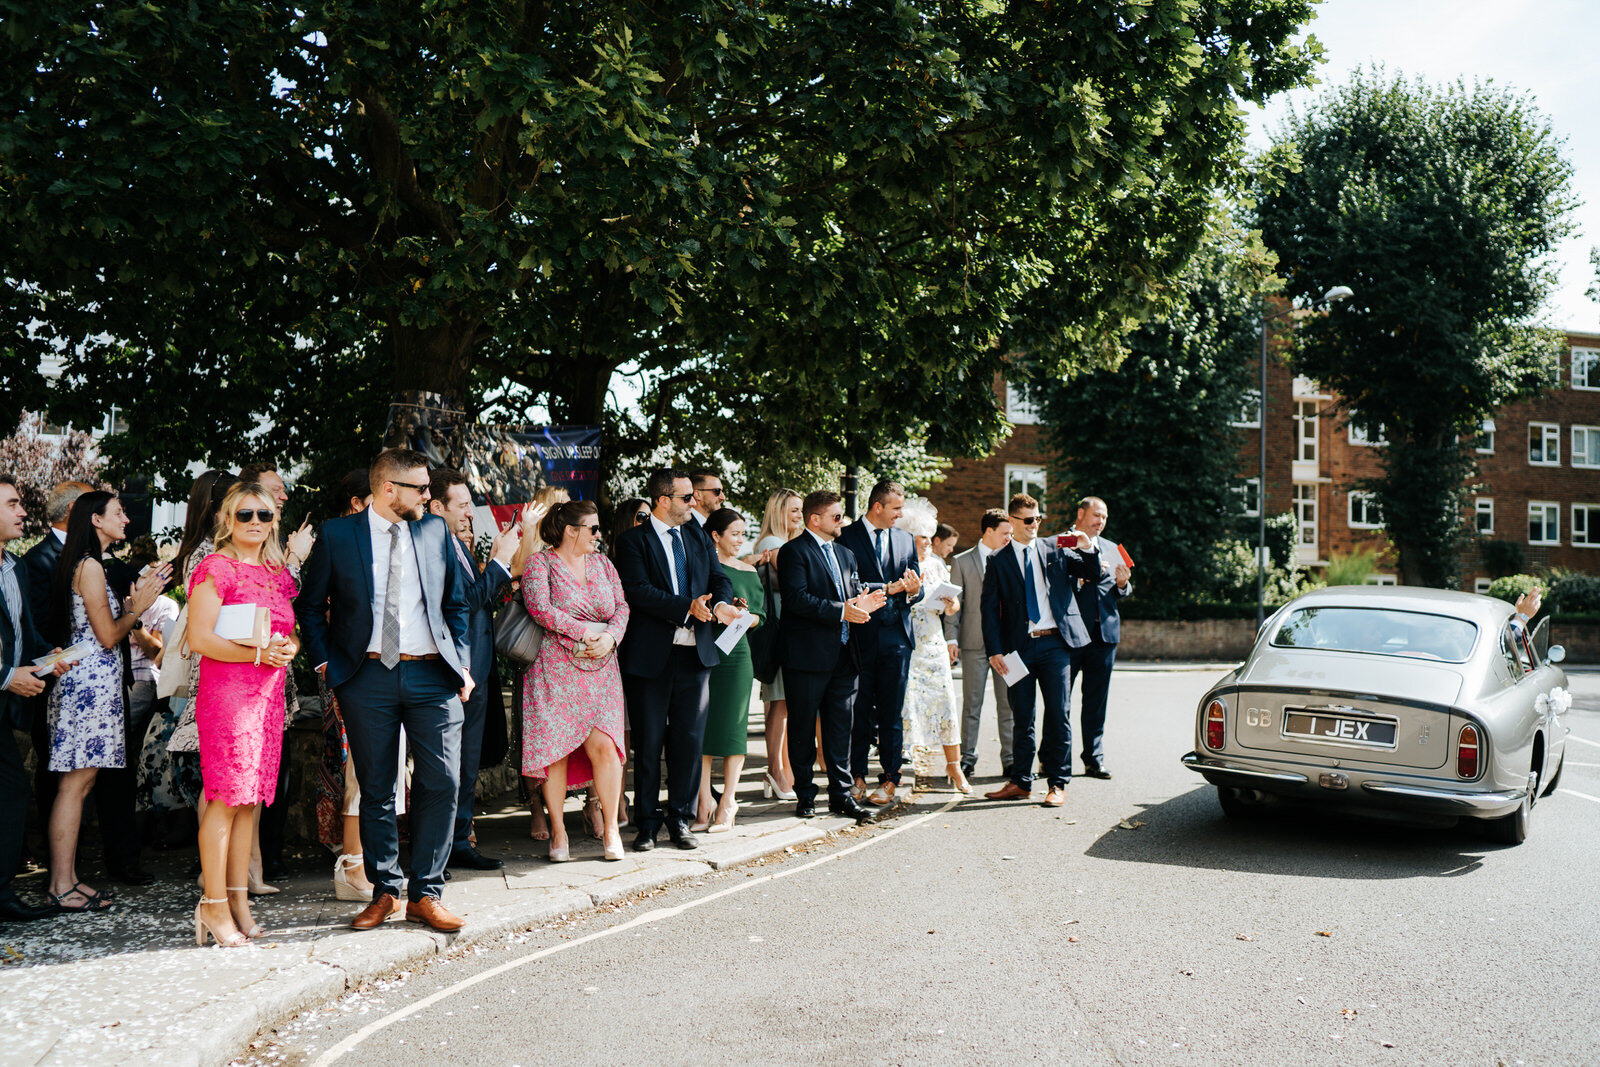 Guests stand on the left and wave as couple depart the church in vintage wedding car on the right